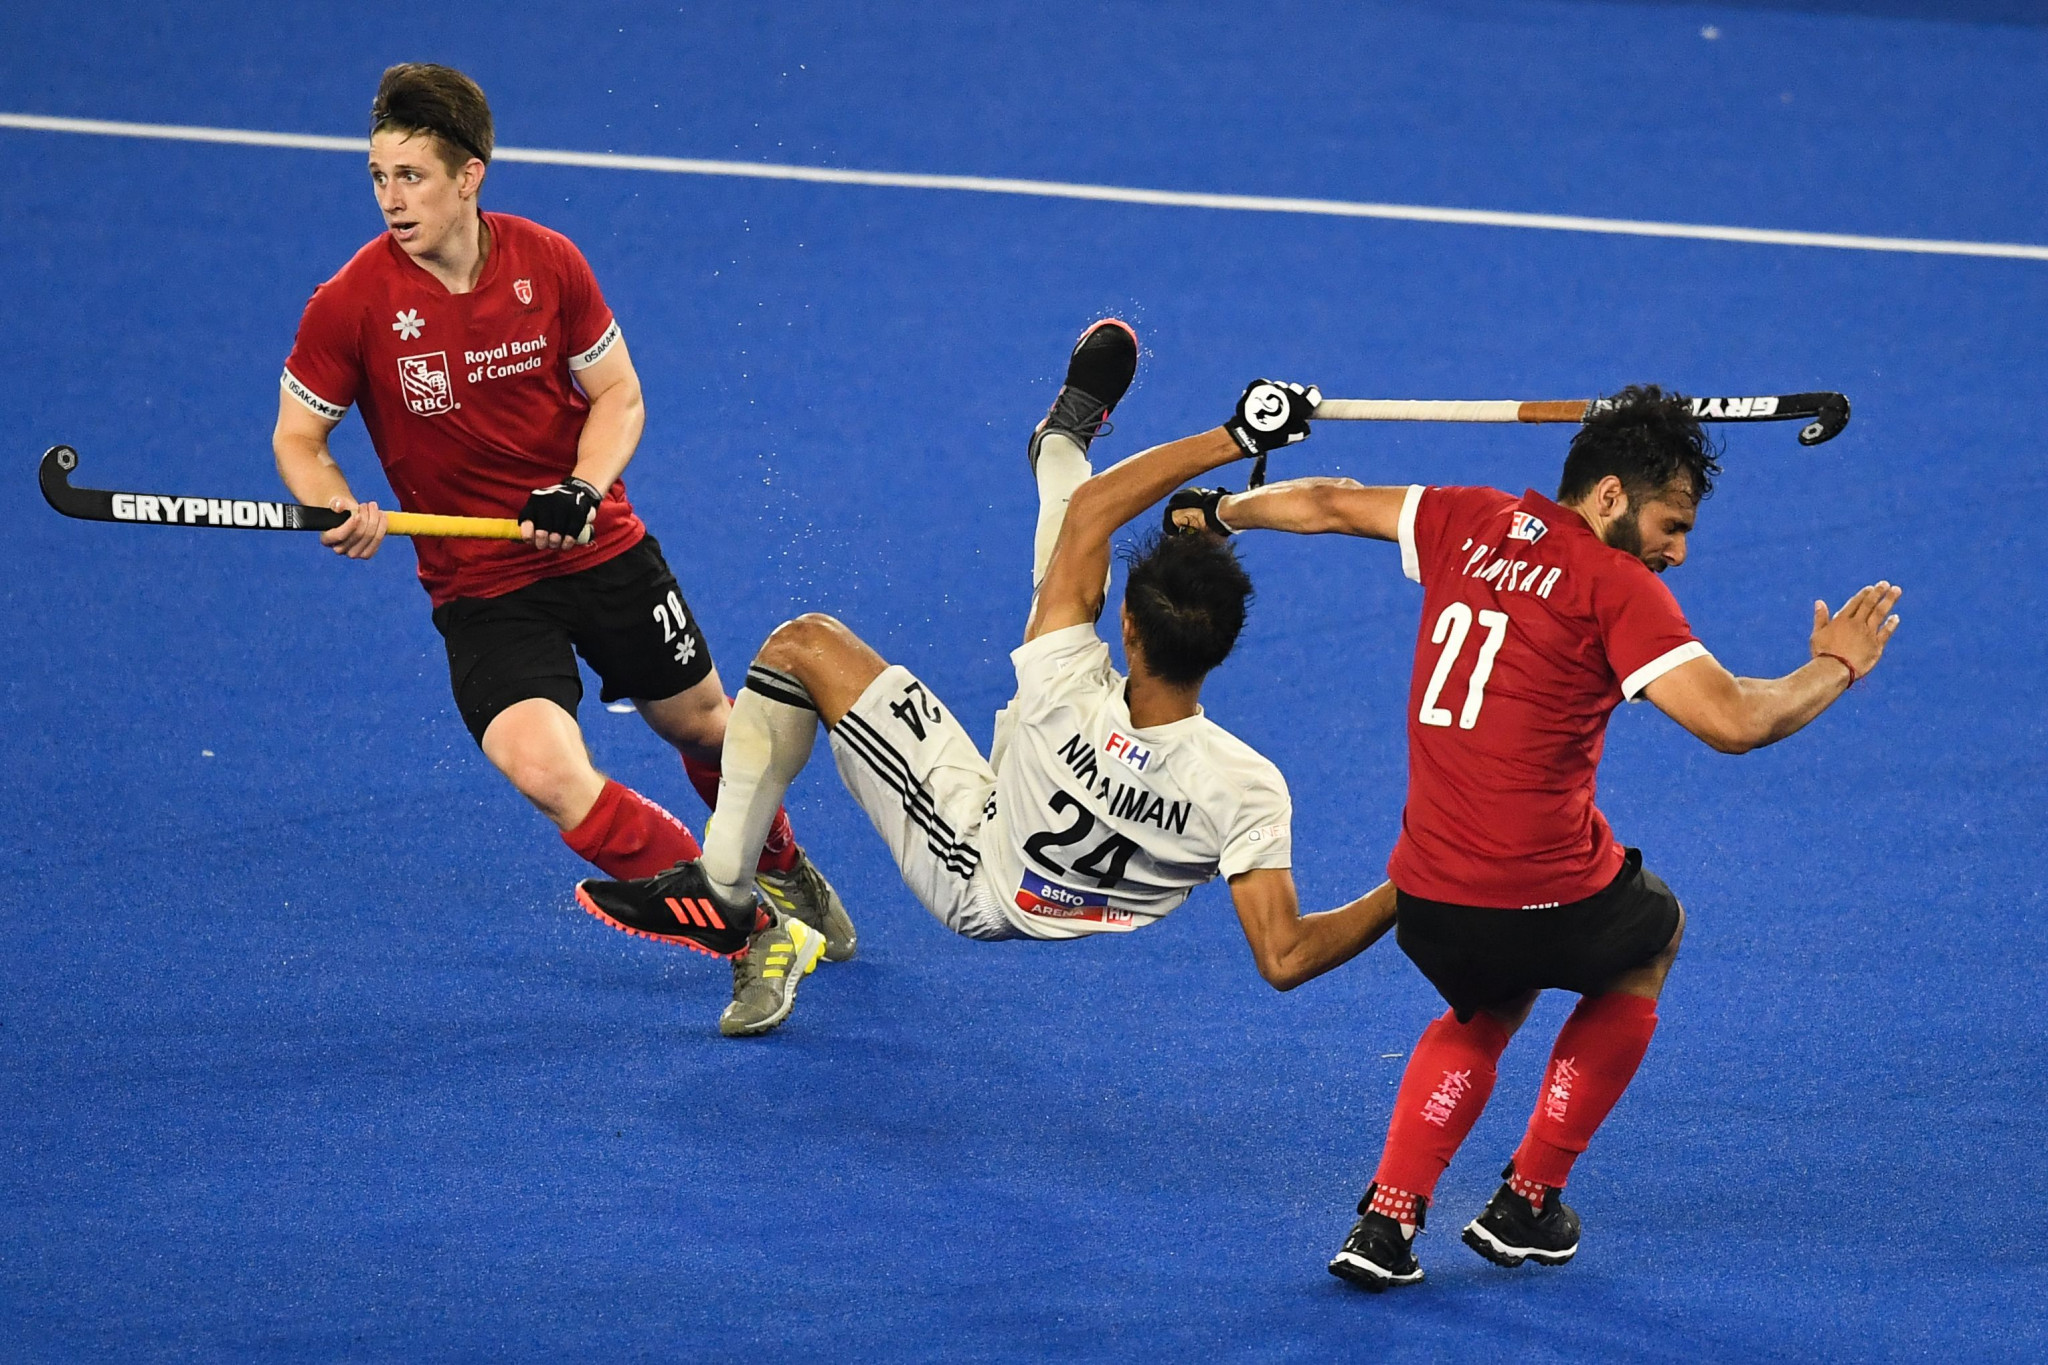 GettyImages 1141090344 - New Nations Cup - Route to the ProLeague - The International Hockey Federation (FIH) has launched the bidding process for the inaugural FIH Nations Cup, which will be played for the first time in 2022.